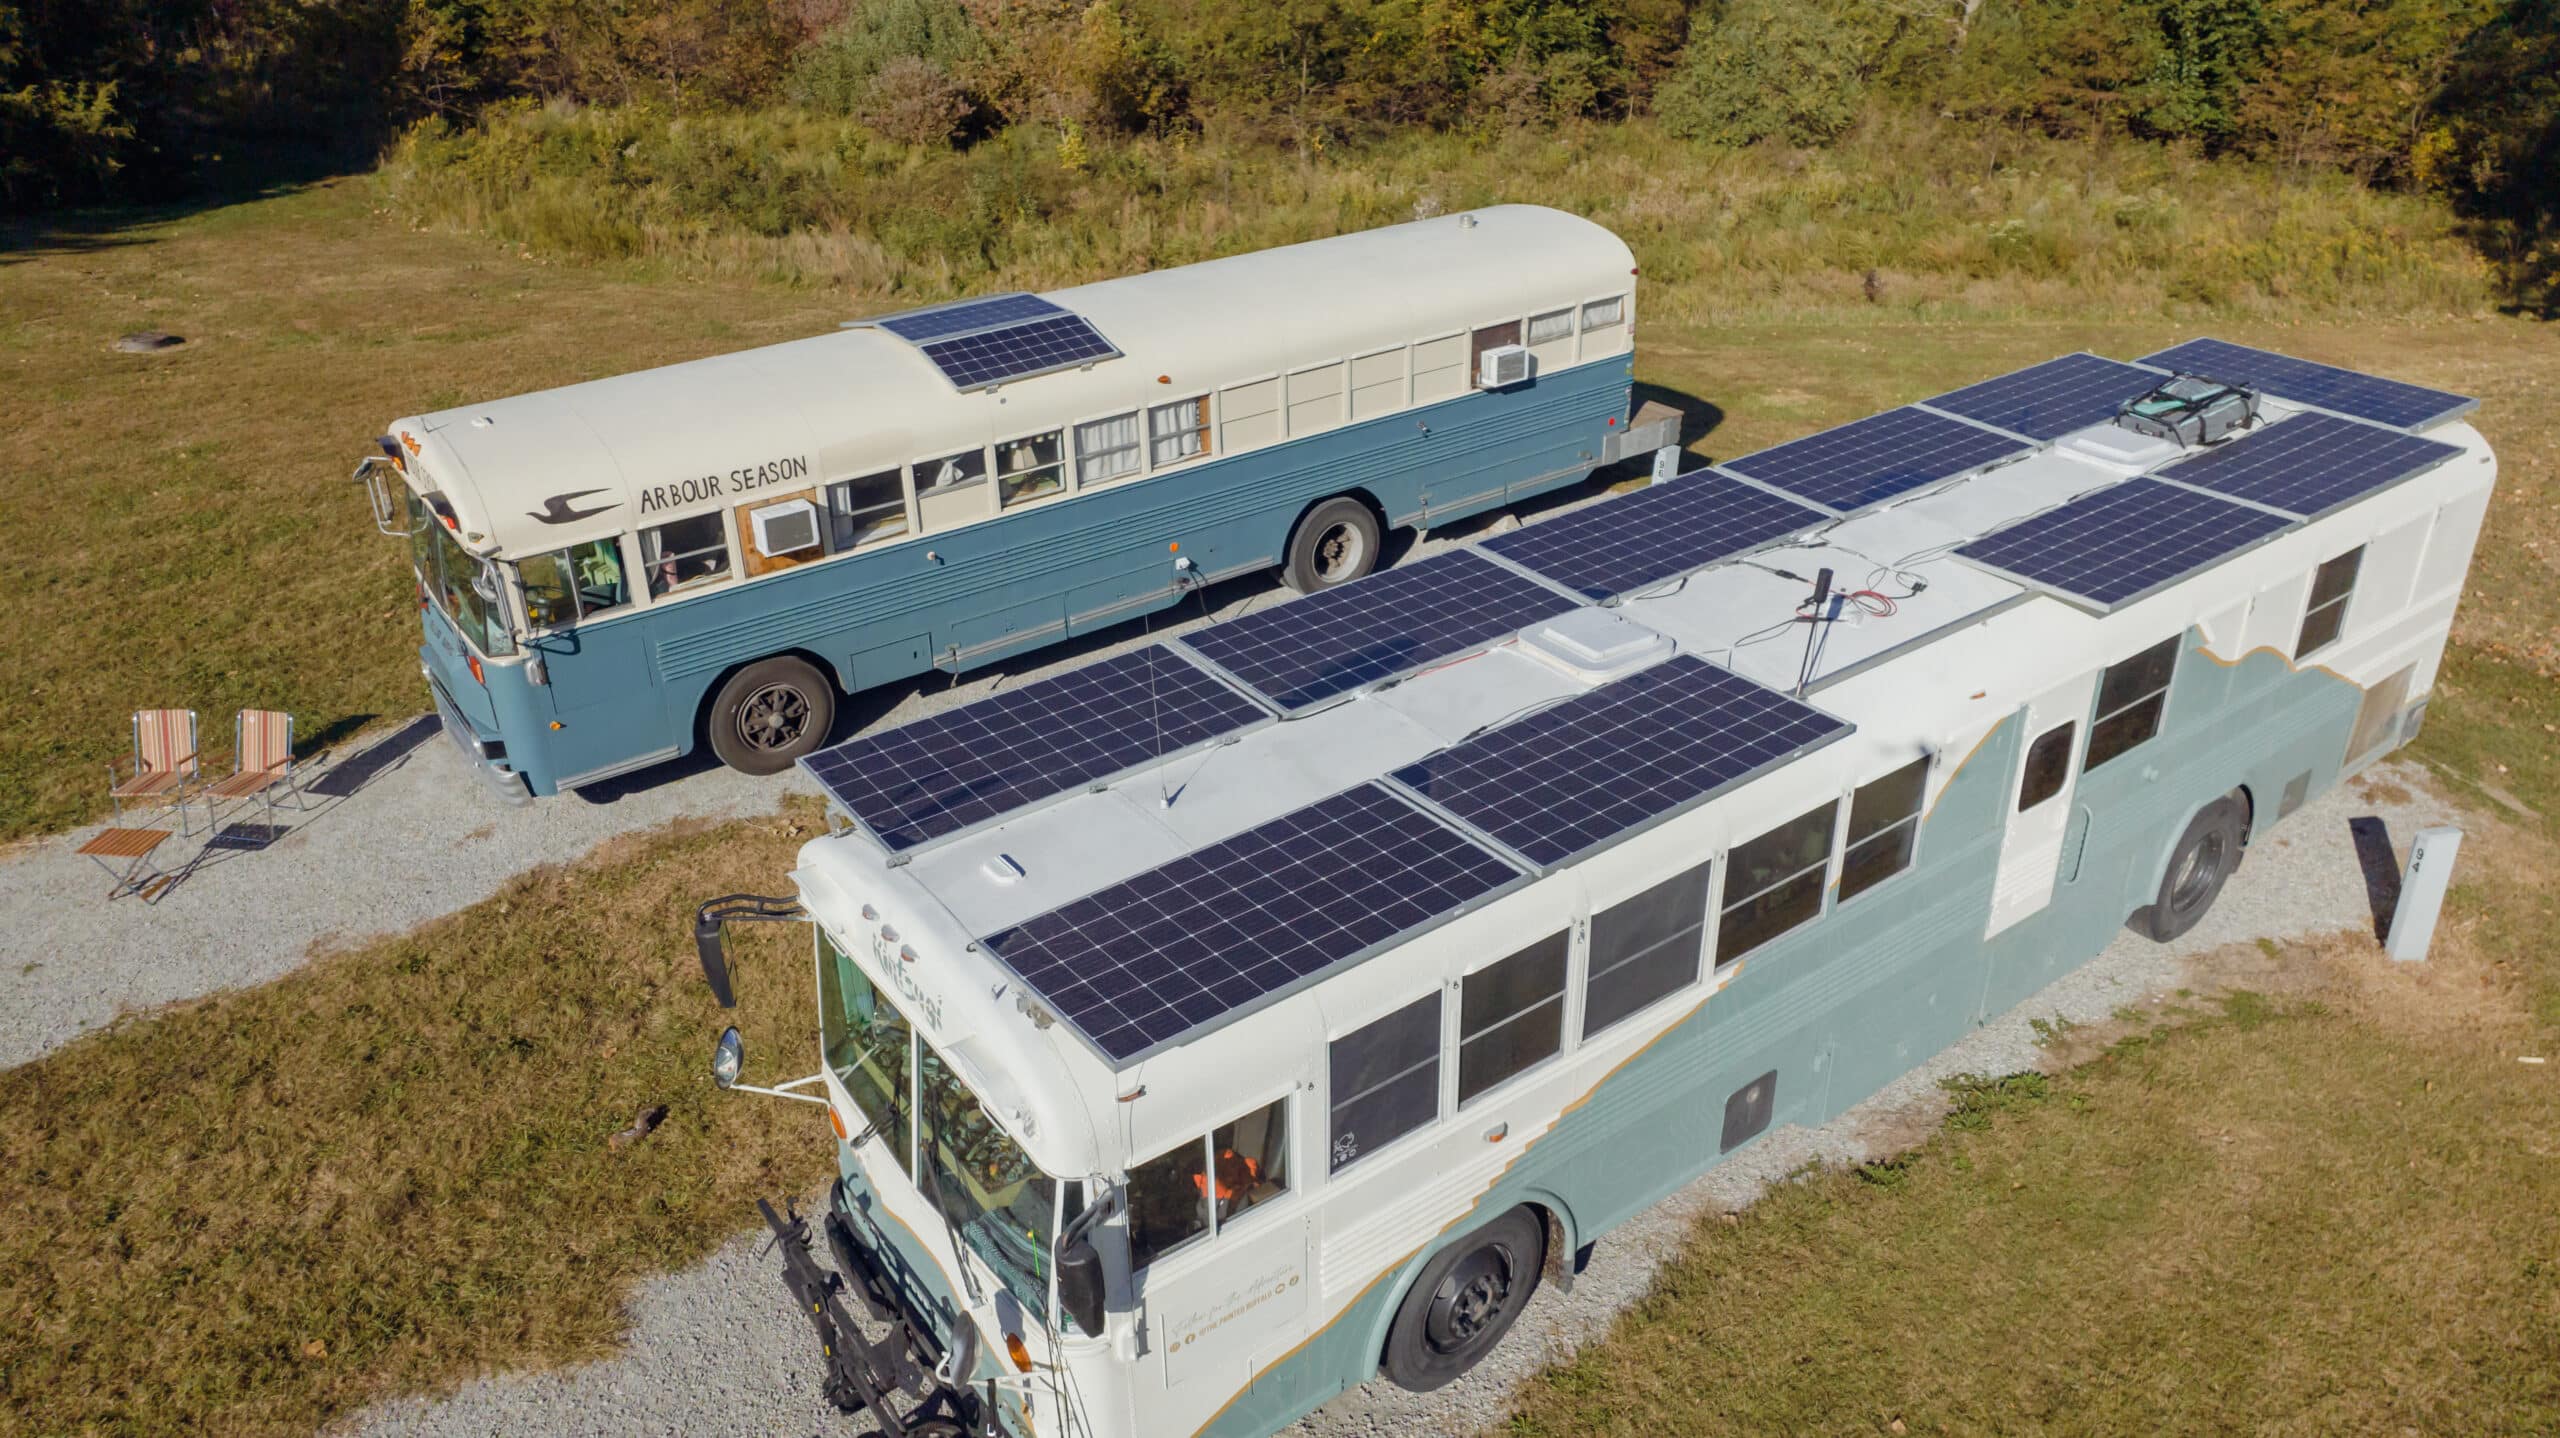 Two Converted Skoolies Parked Next to Each Other with Solar Panels on Top